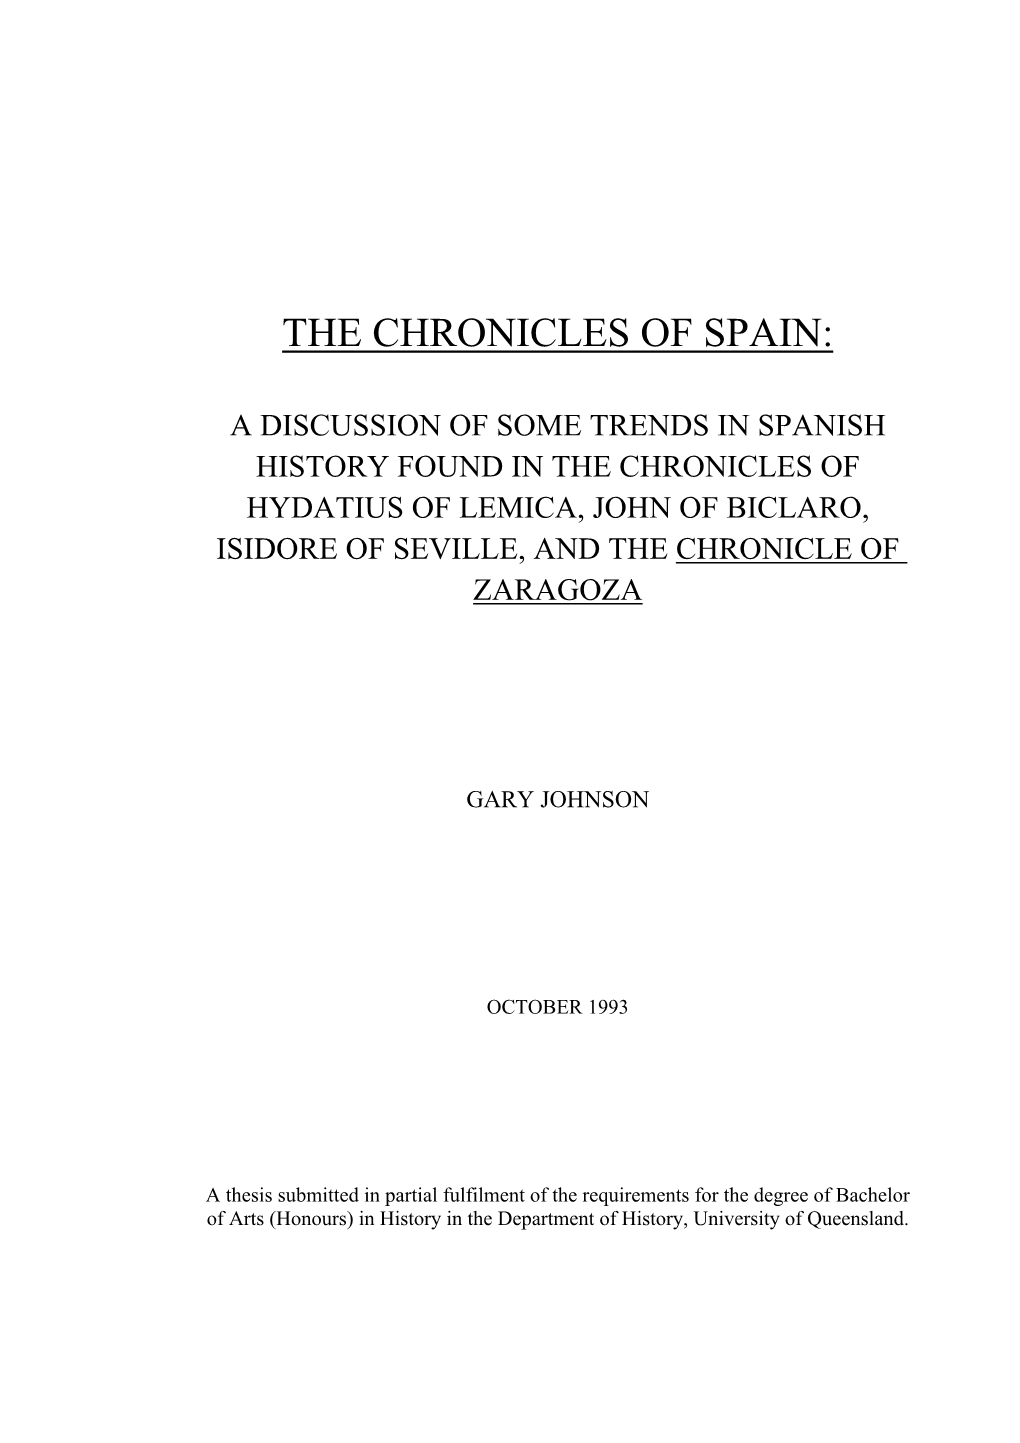 The Chronicles of Spain